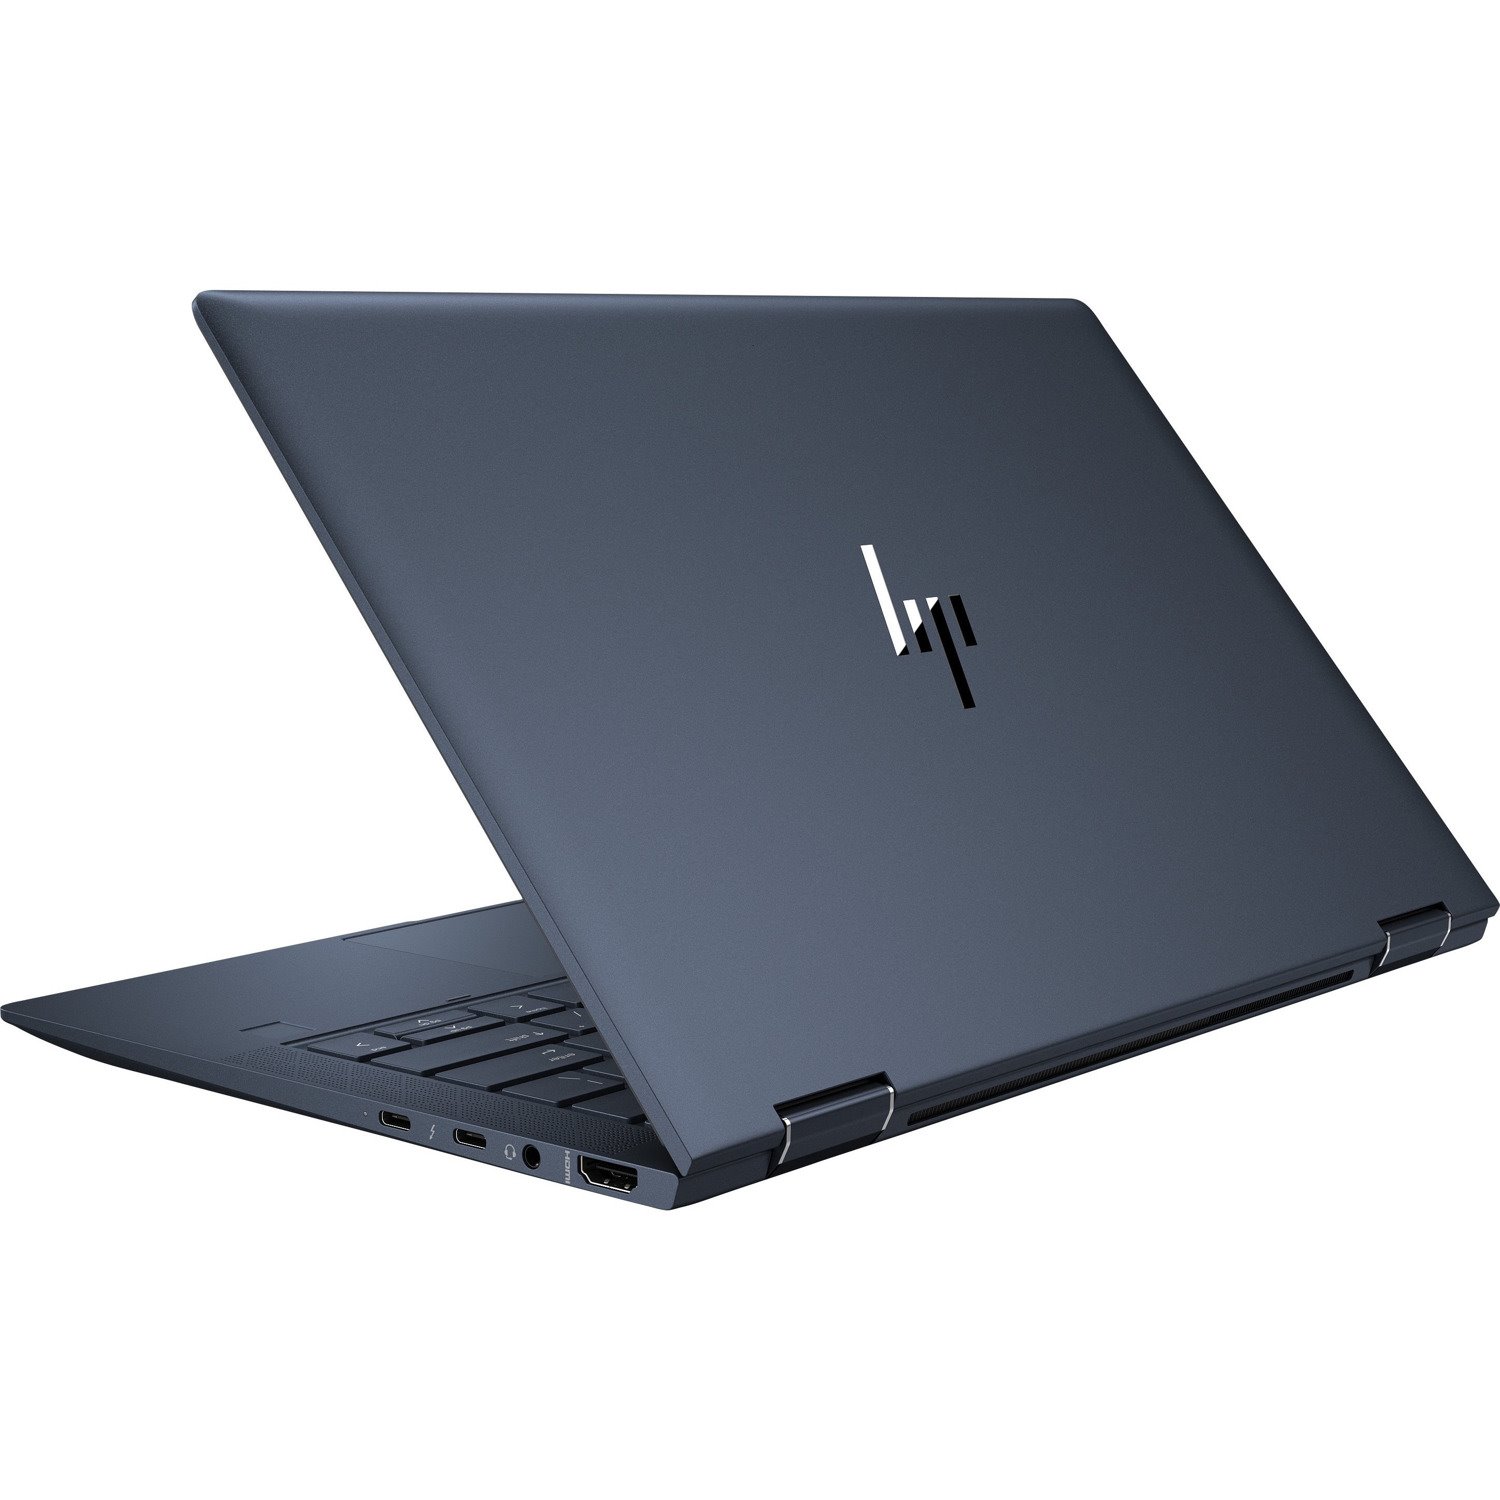 HP Elite Dragonfly G2 33.8 cm (13.3") Touchscreen Convertible 2 in 1 Notebook - Full HD - 1920 x 1080 - Intel Core i7 11th Gen i7-1185G7 Quad-core (4 Core) 3 GHz - 16 GB Total RAM - 512 GB SSD